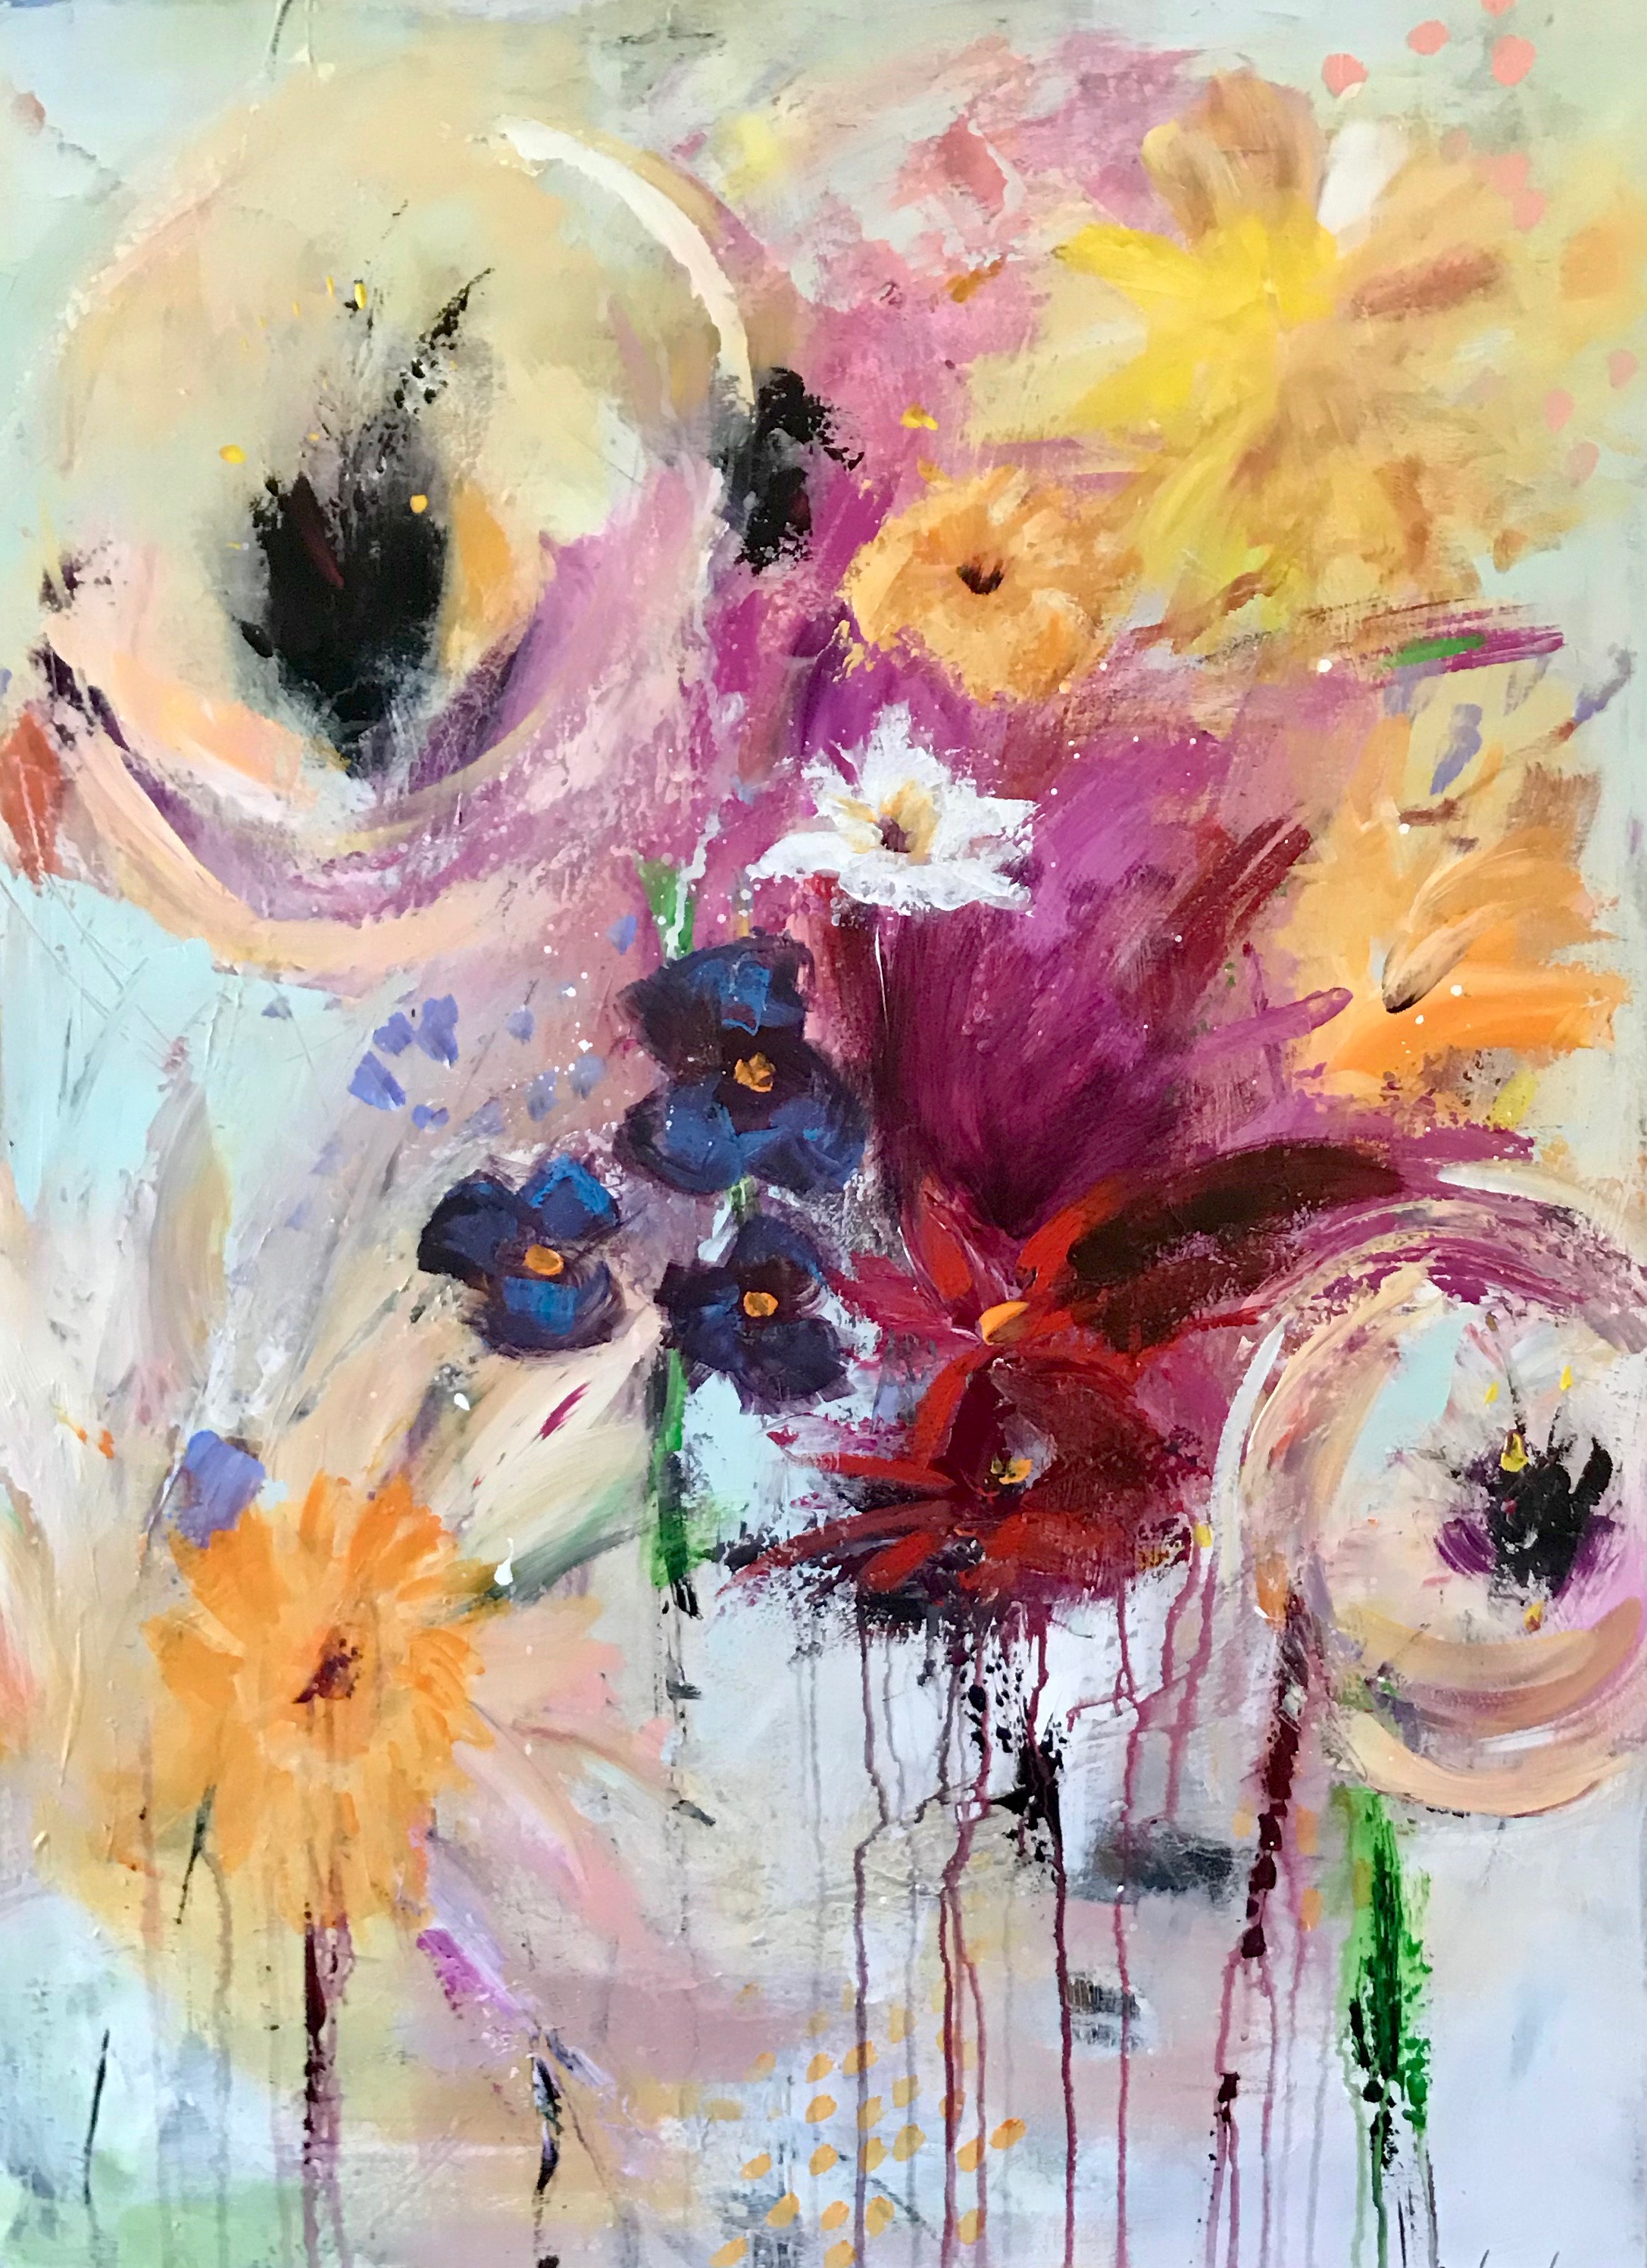 'Bliss' 30x40 in  contemporary modern flower, floral painting by Cher Devereaux on stretched canvas.